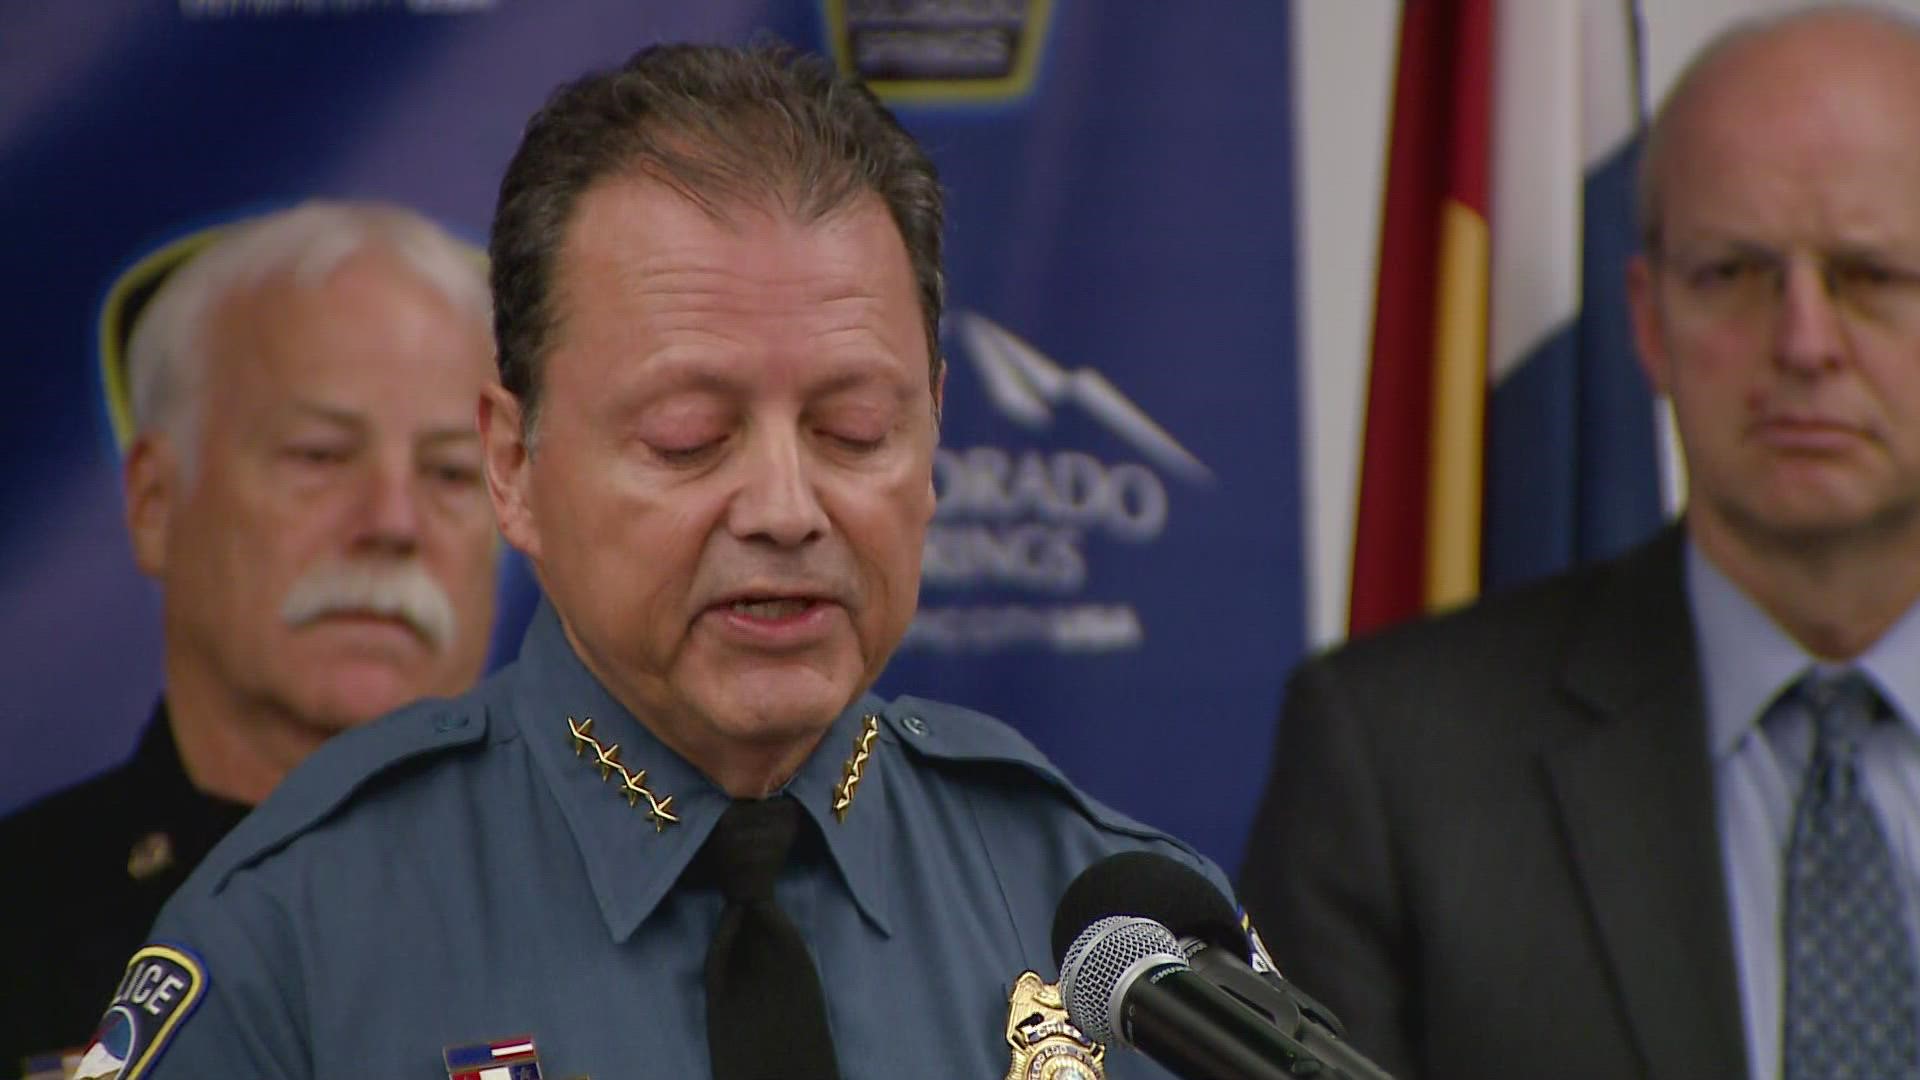 The chief of the Colorado Springs Police Department shared preliminary information about the shooting at Club Q.